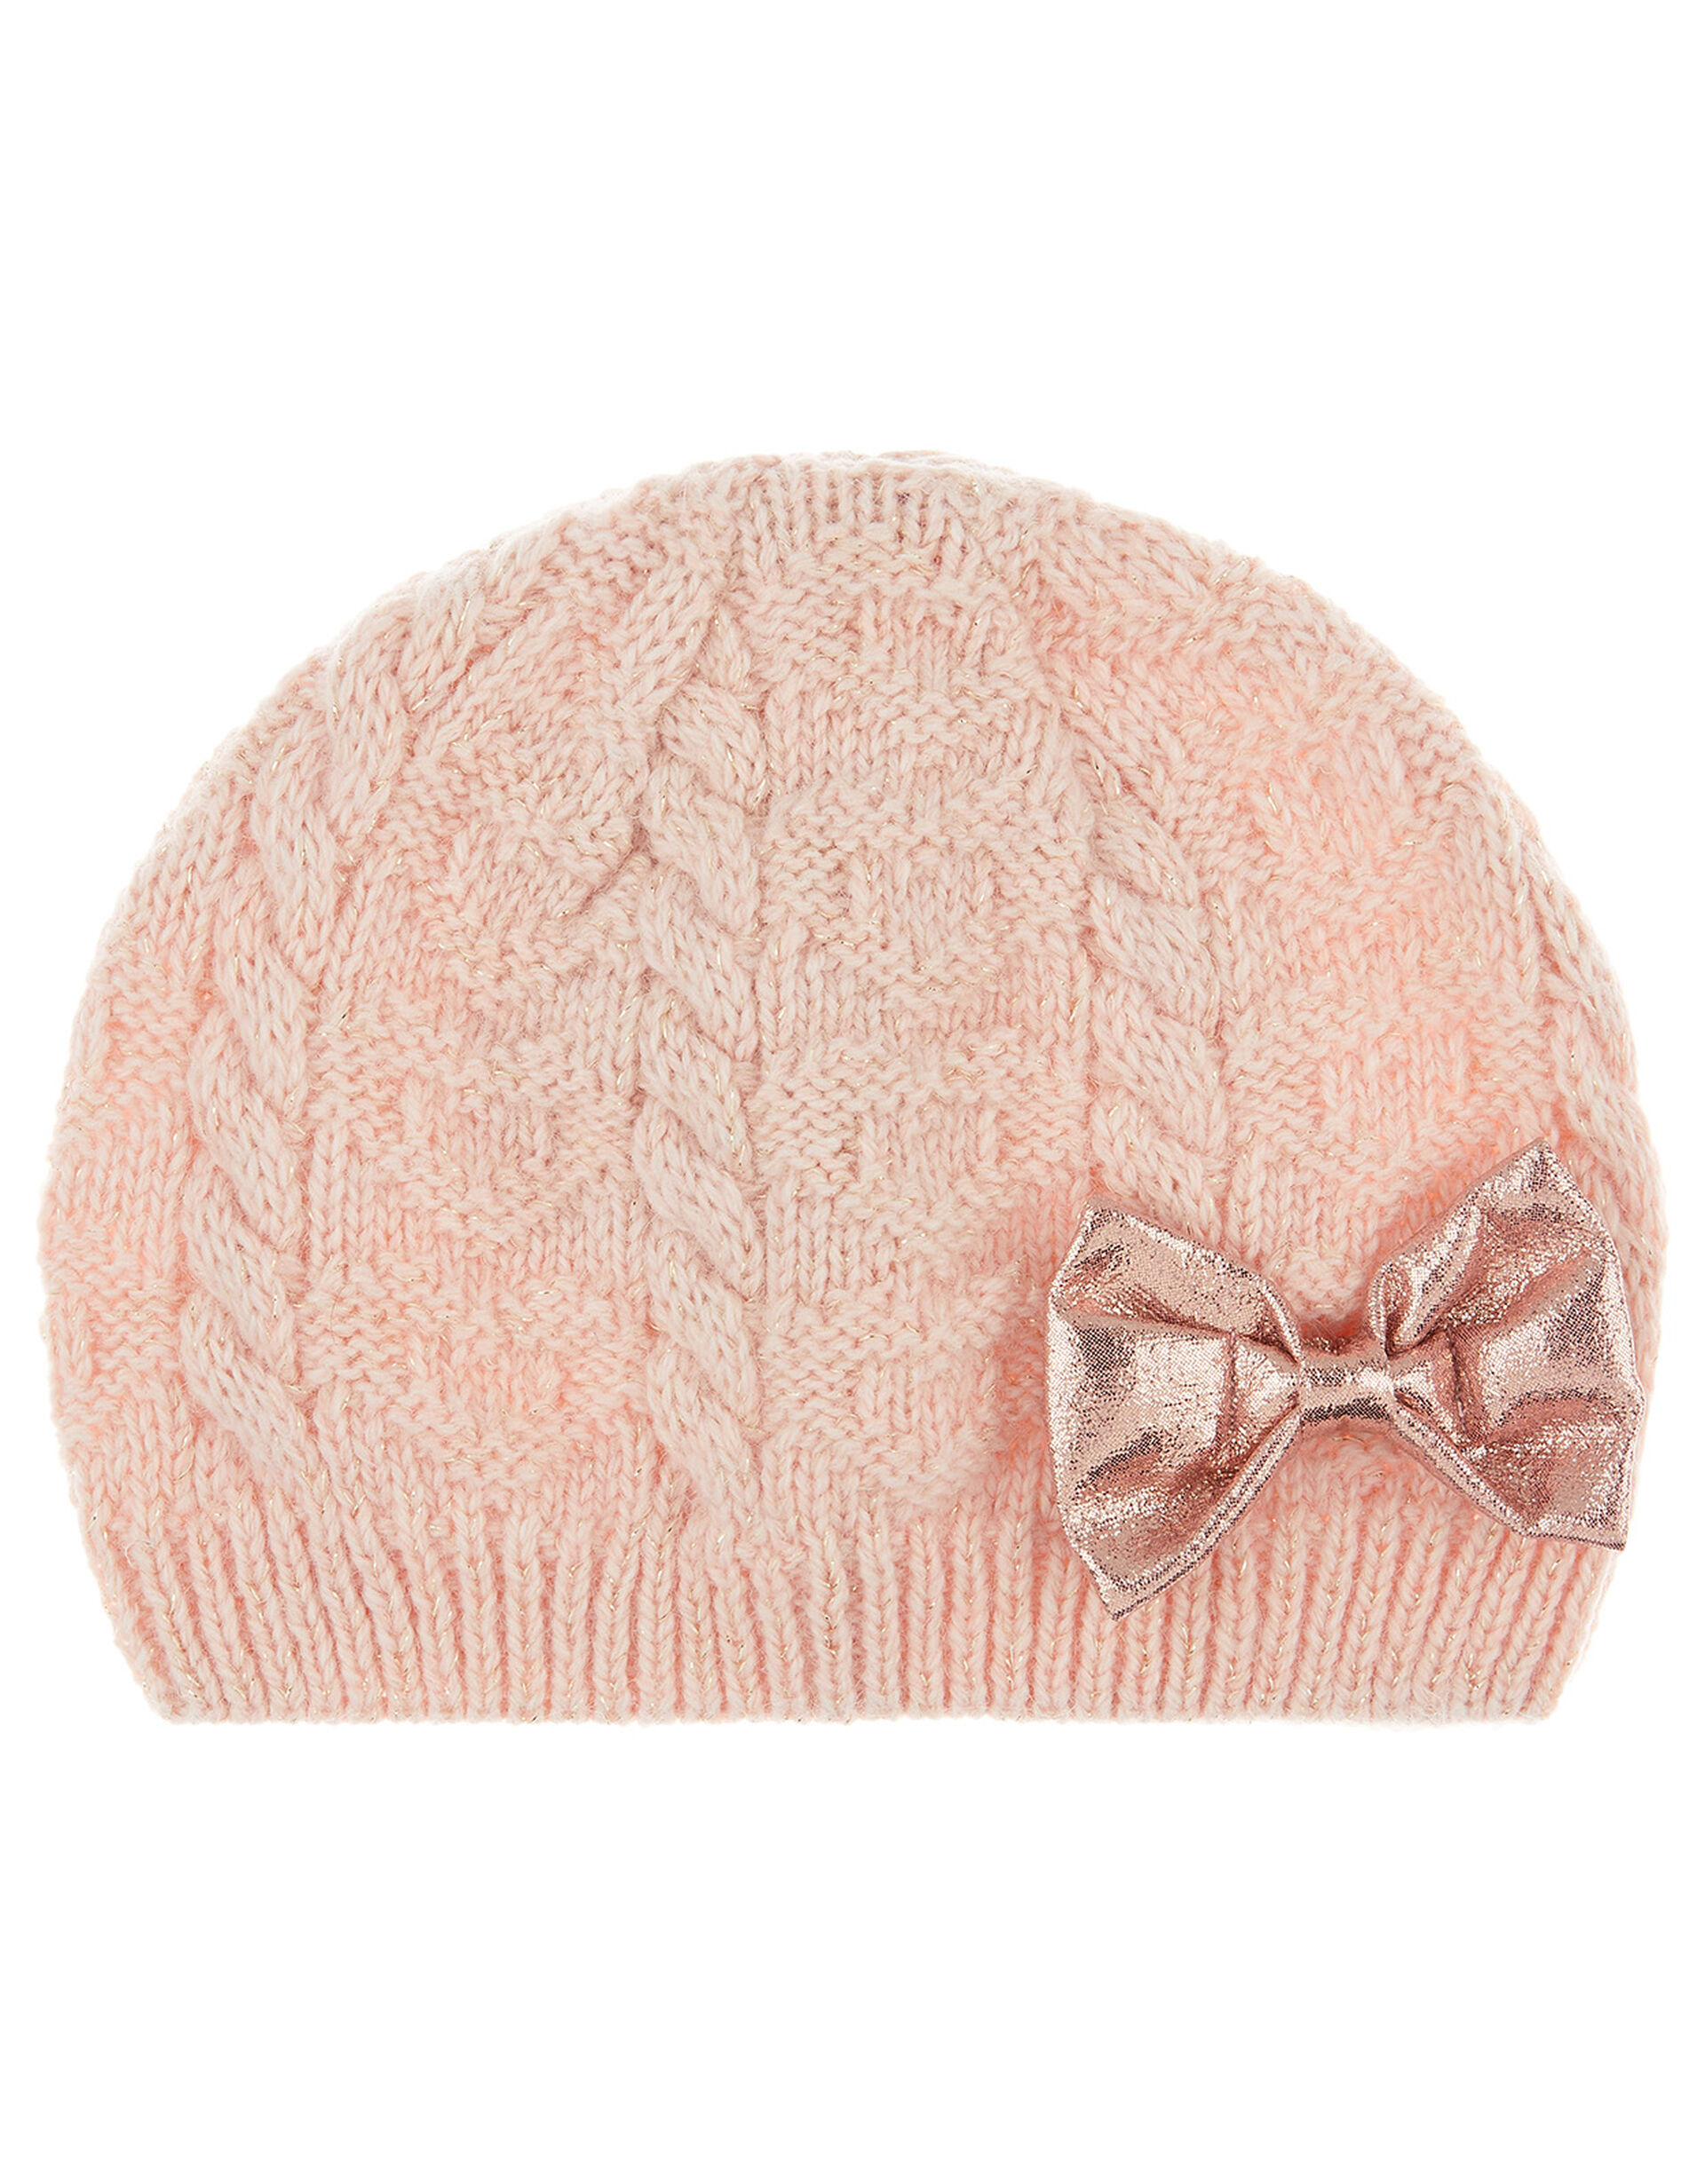 Baby Poppy Shimmer Bow Cable Knit Beanie, Pink (PINK), large